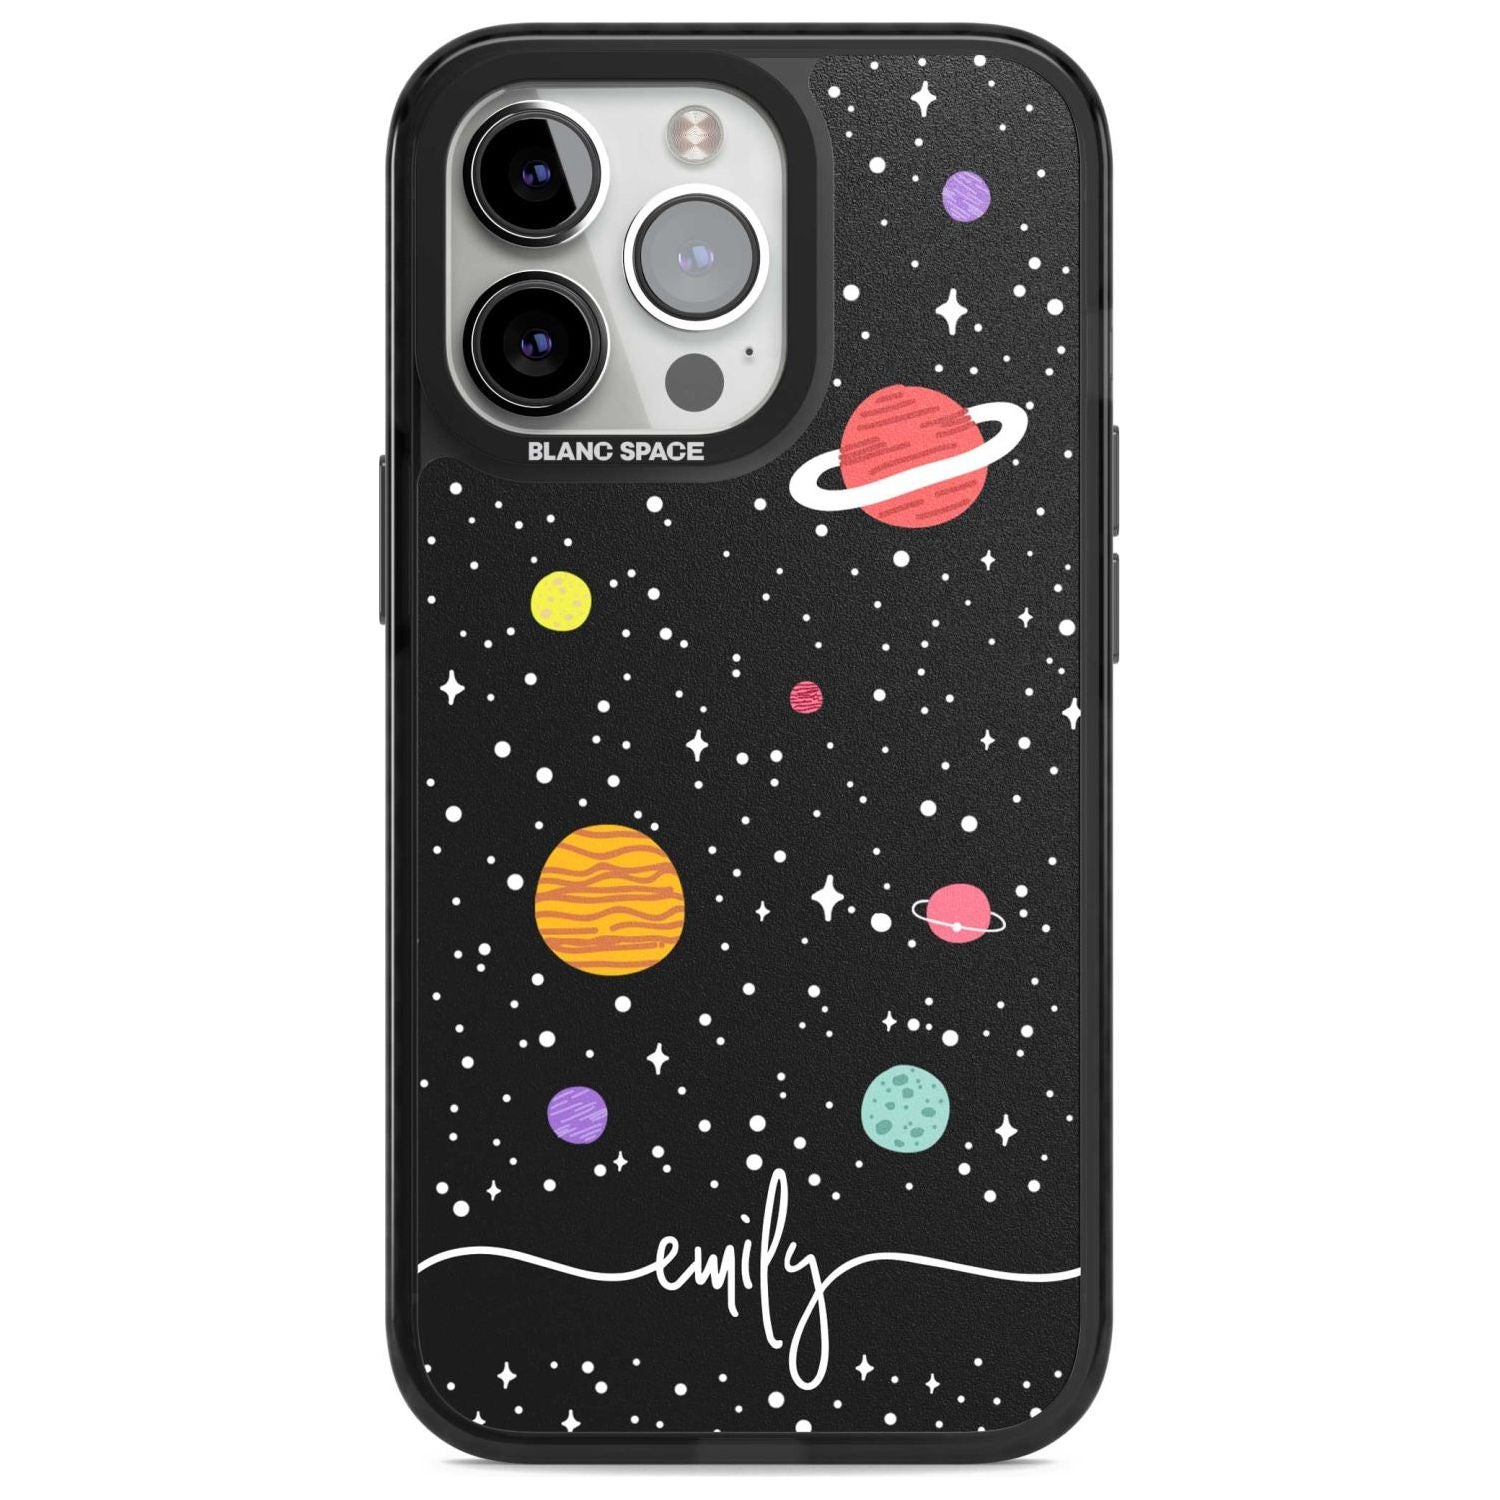 Personalised Cute Cartoon Planets Phone Case iPhone 15 Pro Max / Magsafe Black Impact Case,iPhone 15 Pro / Magsafe Black Impact Case,iPhone 14 Pro Max / Magsafe Black Impact Case,iPhone 14 Pro / Magsafe Black Impact Case,iPhone 13 Pro / Magsafe Black Impact Case Blanc Space